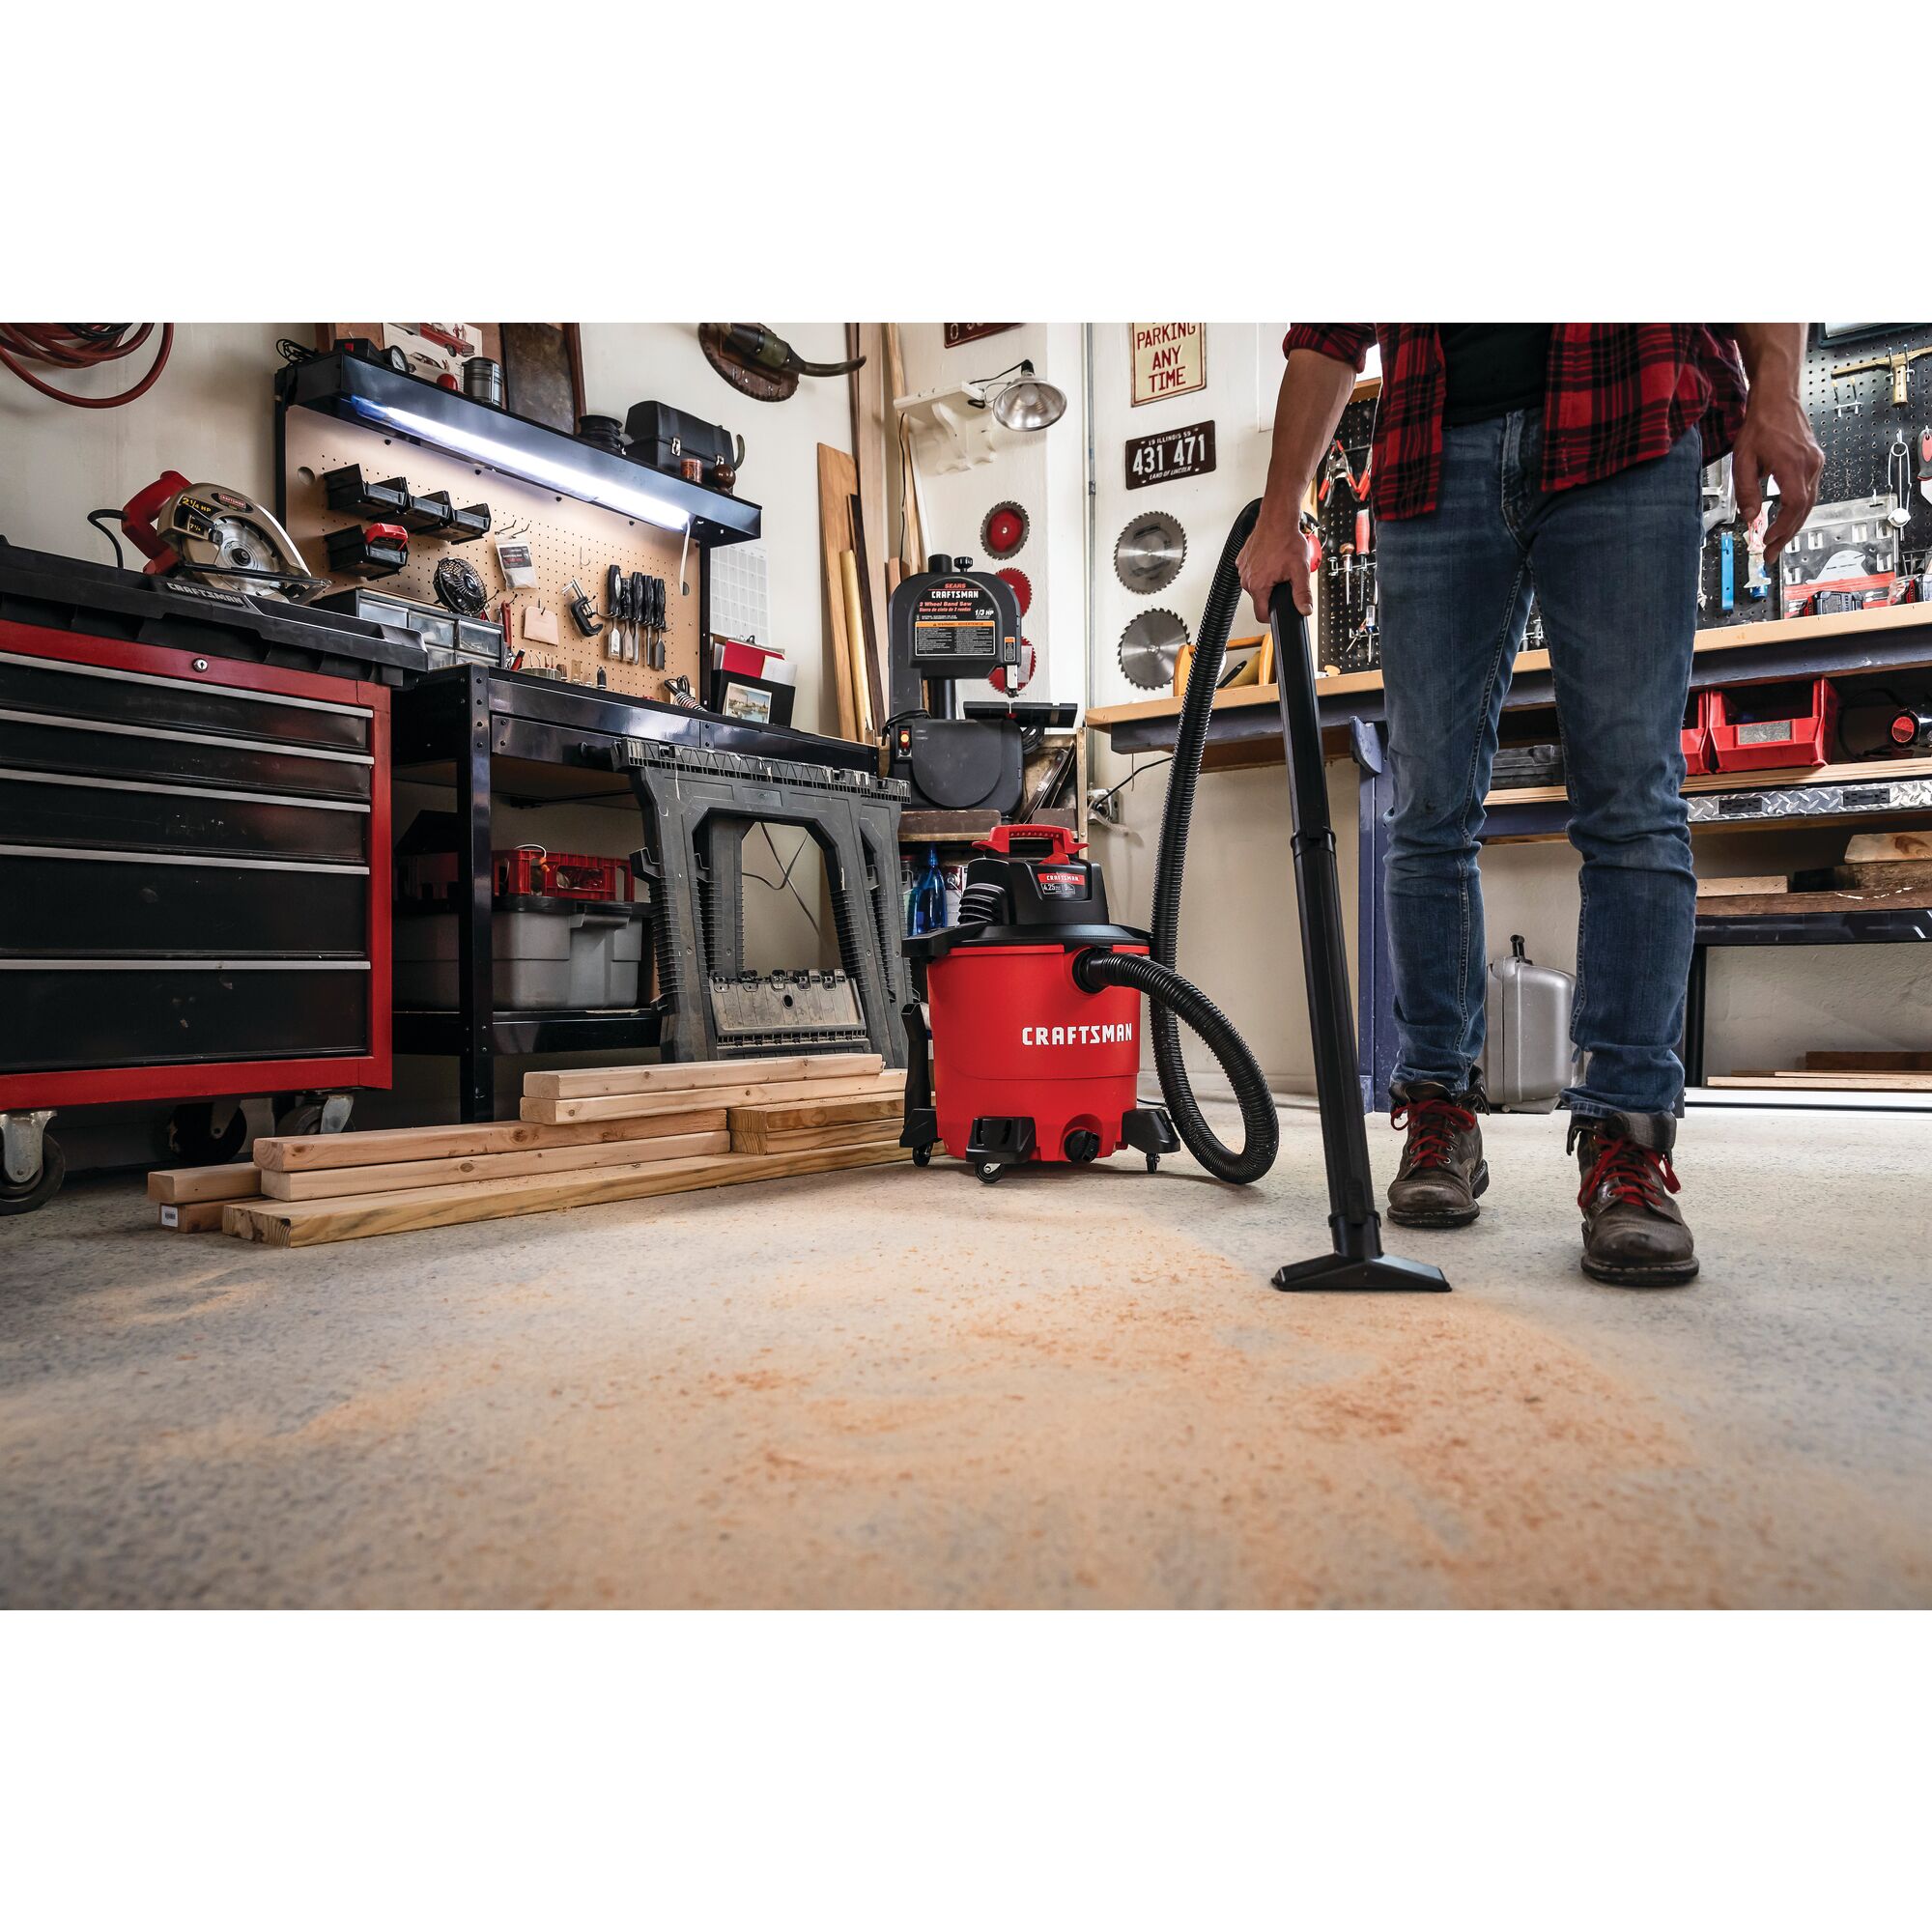 View of CRAFTSMAN Accessories: Vacuums  being used by consumer